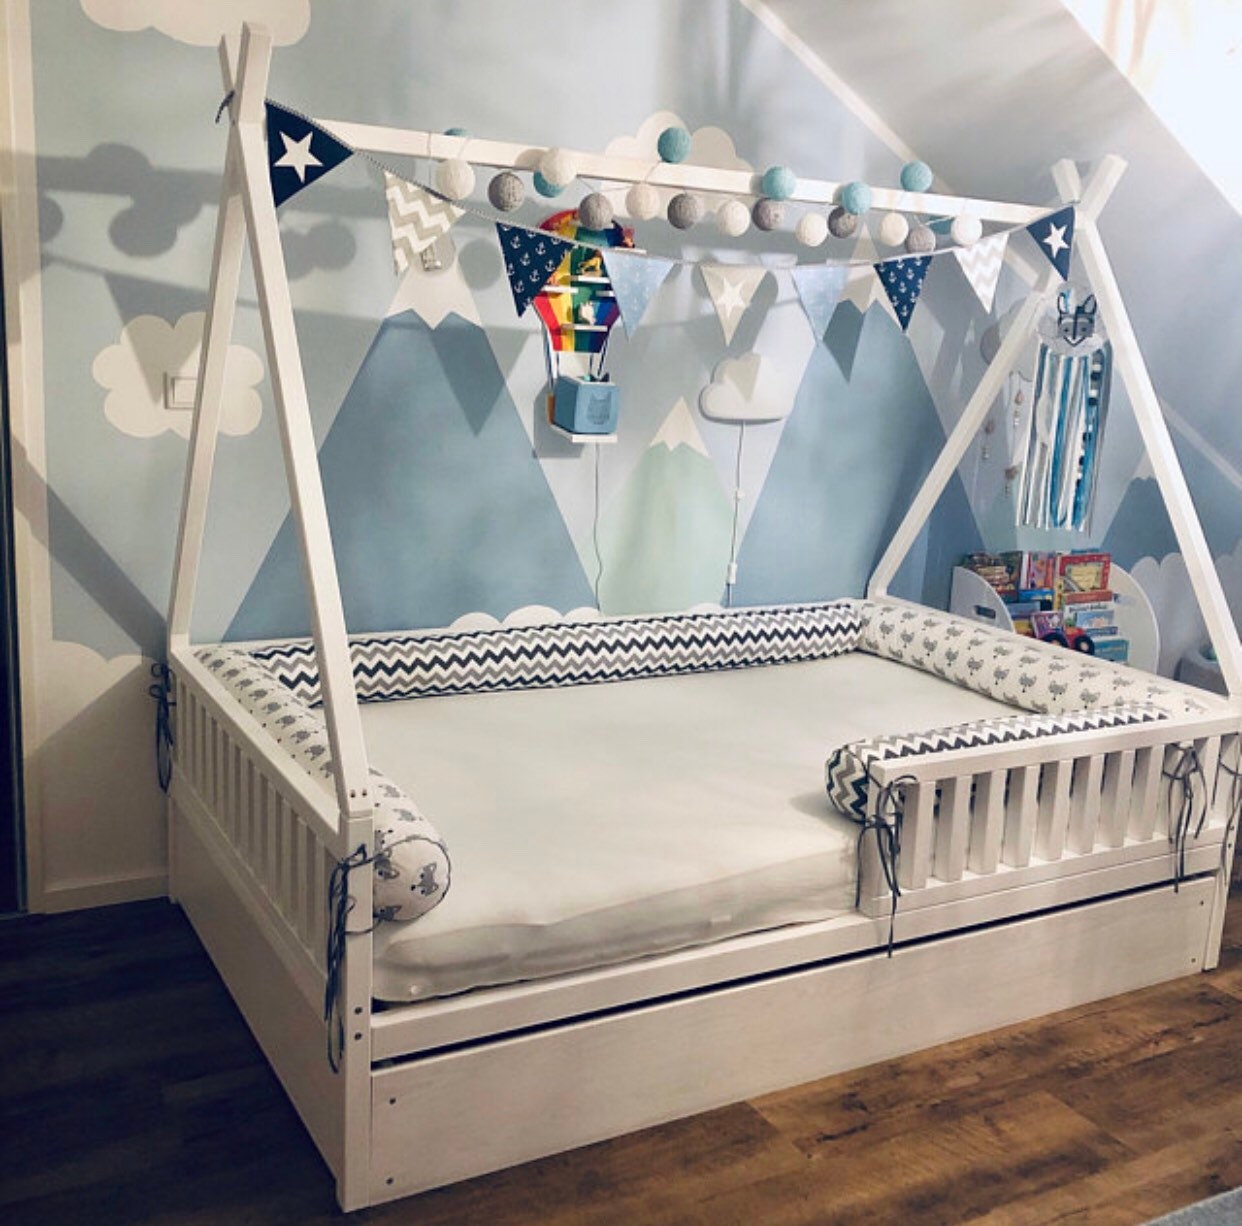 Bumper For The Toddler Floor Bed Baby, Twin Bed Bumper